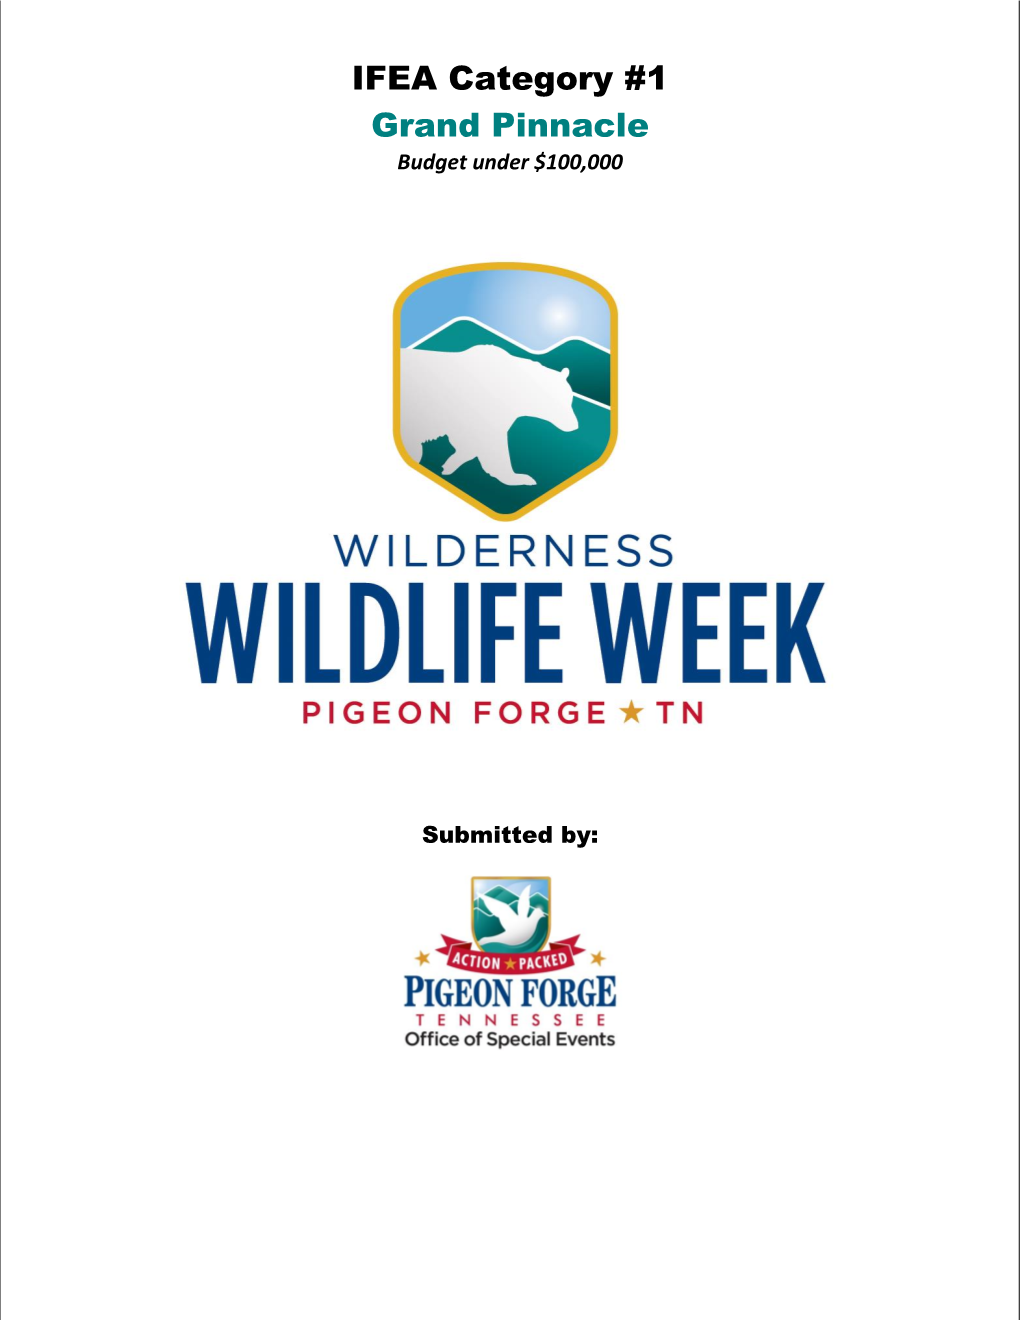 Pigeon Forge Office of Special Events Has Discovered This Group Is the Main Segment of Wilderness Wildlife Week’S Overall Attendee Makeup